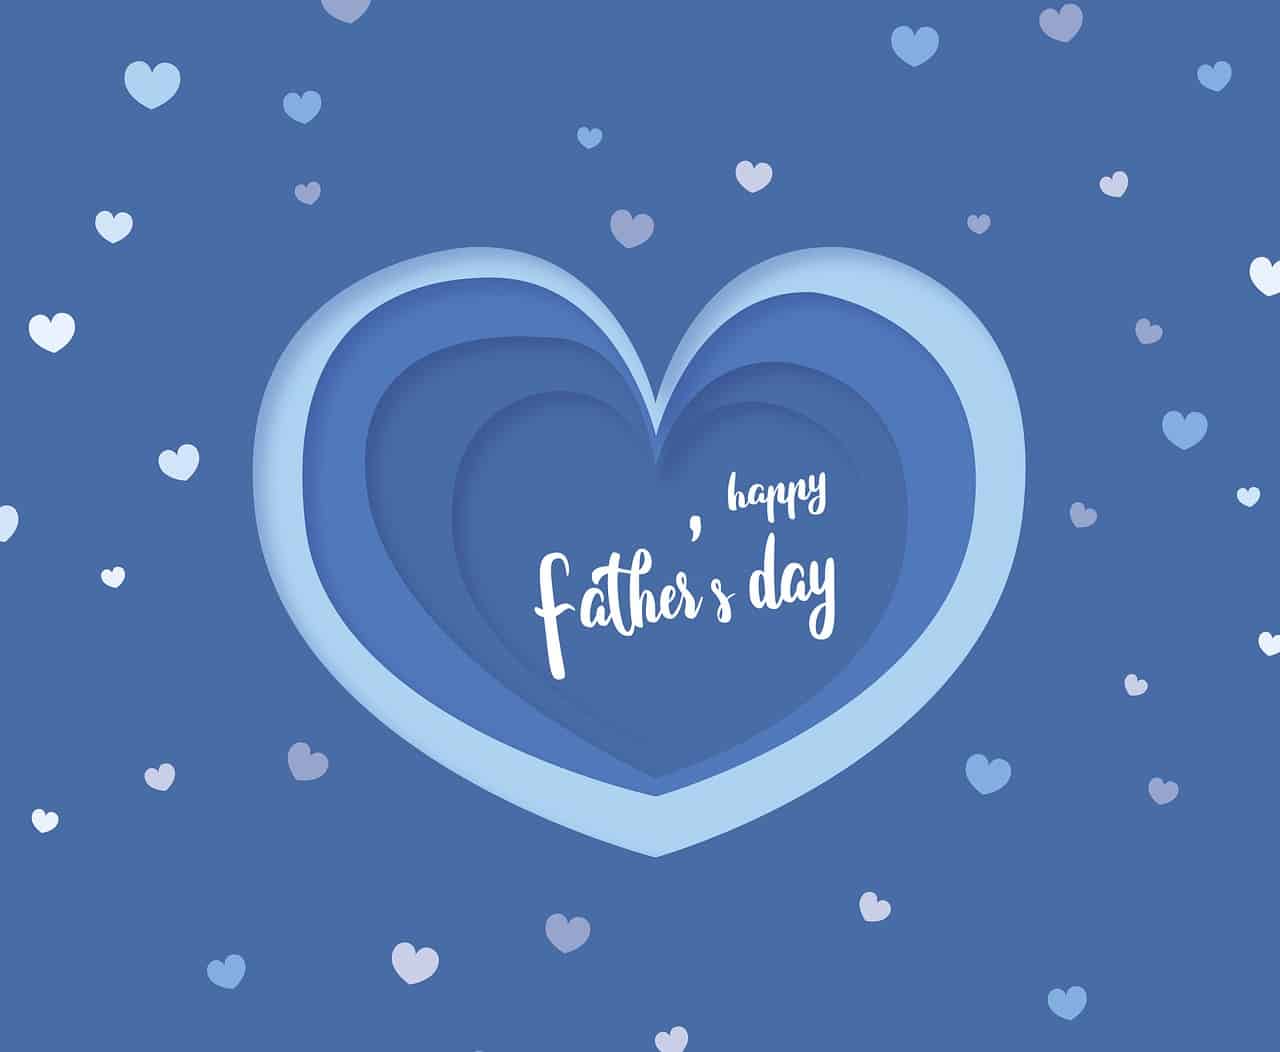 Fathers Day Images HD